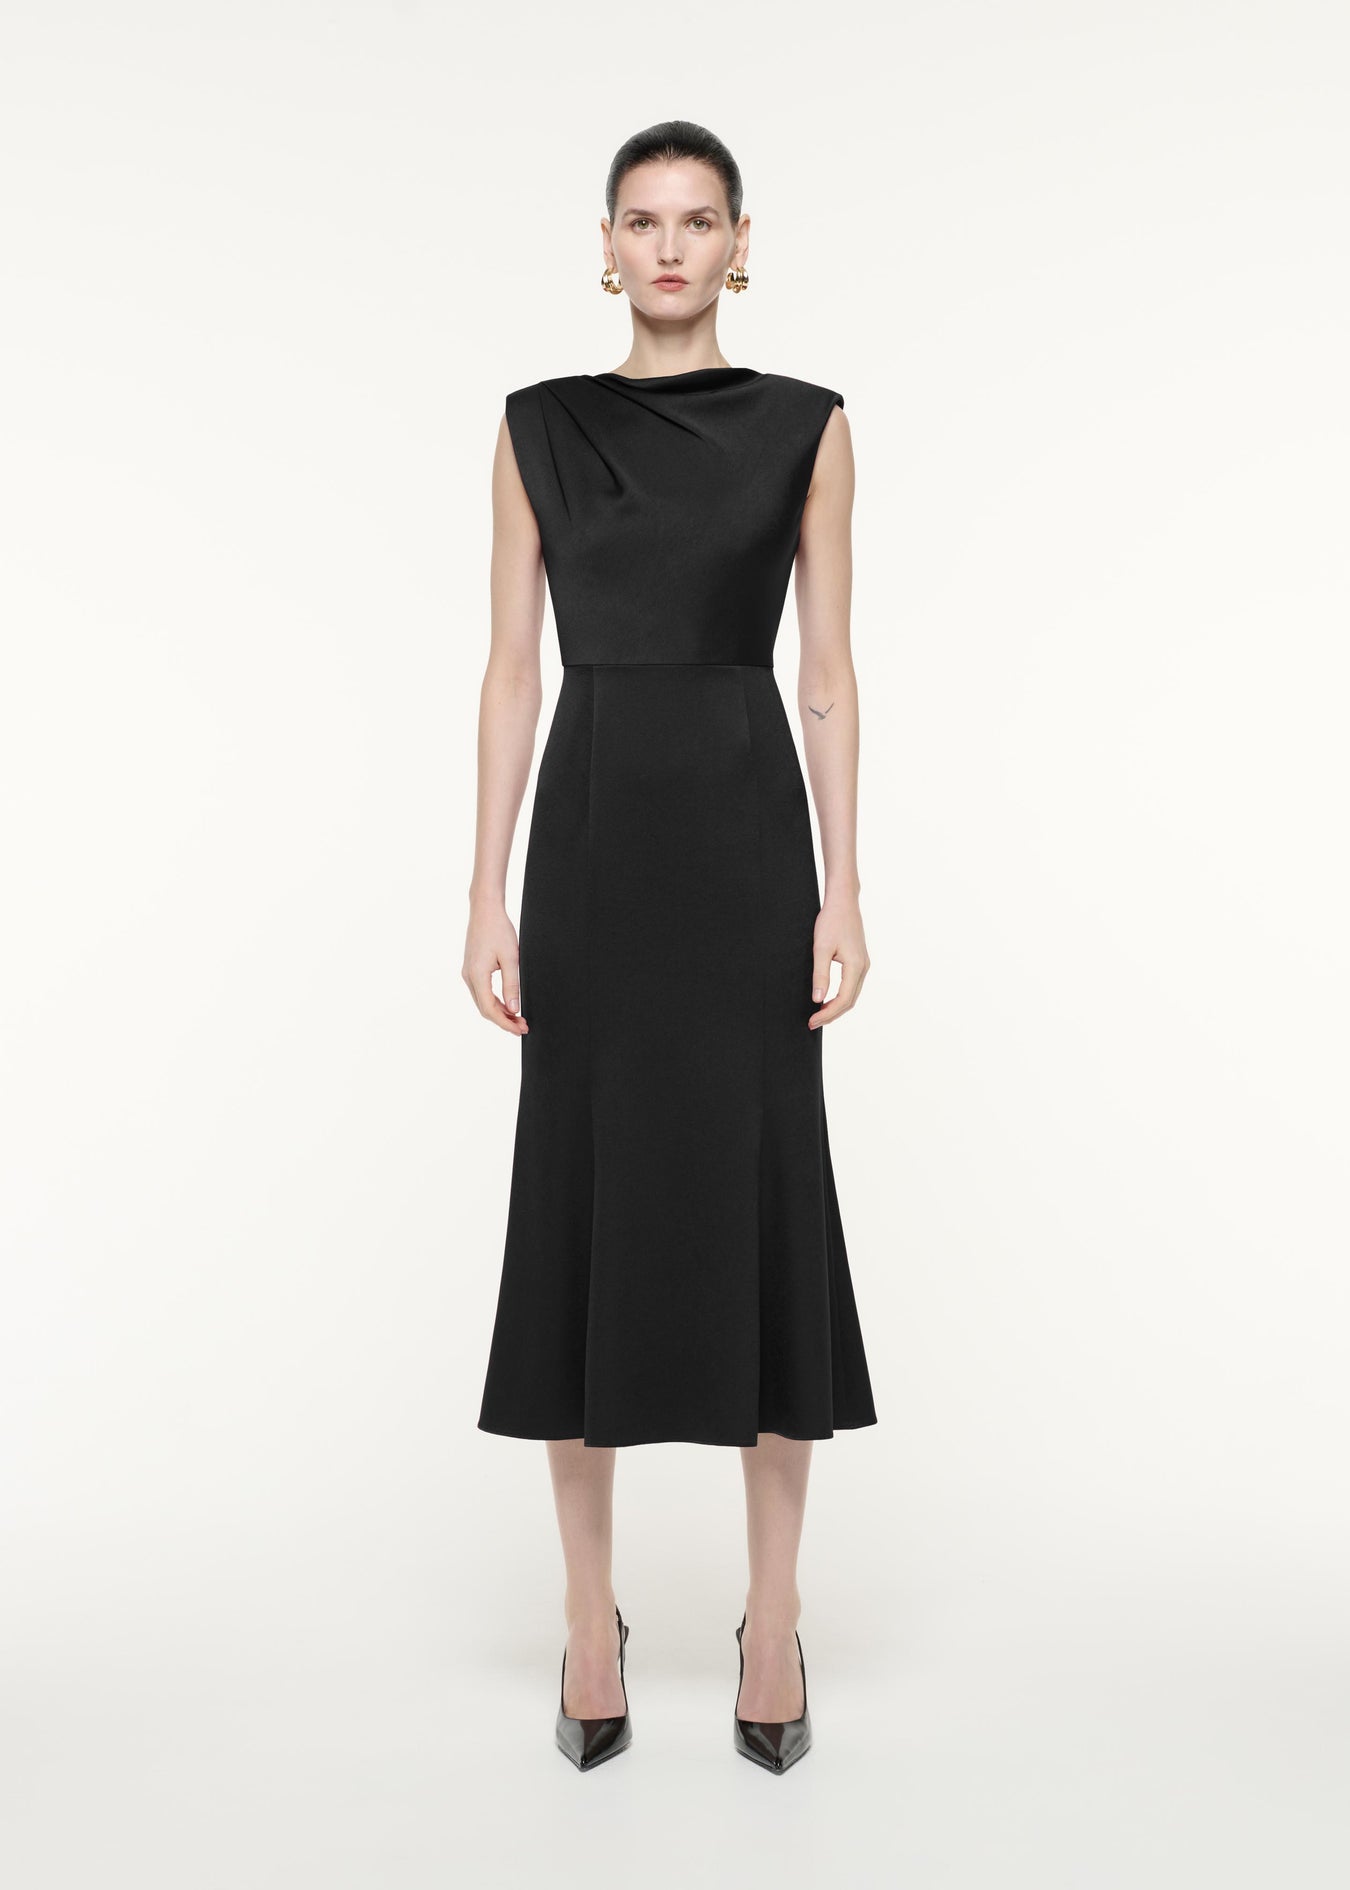 A front view image of a model wearing the Satin Crepe Midi Dress in Black